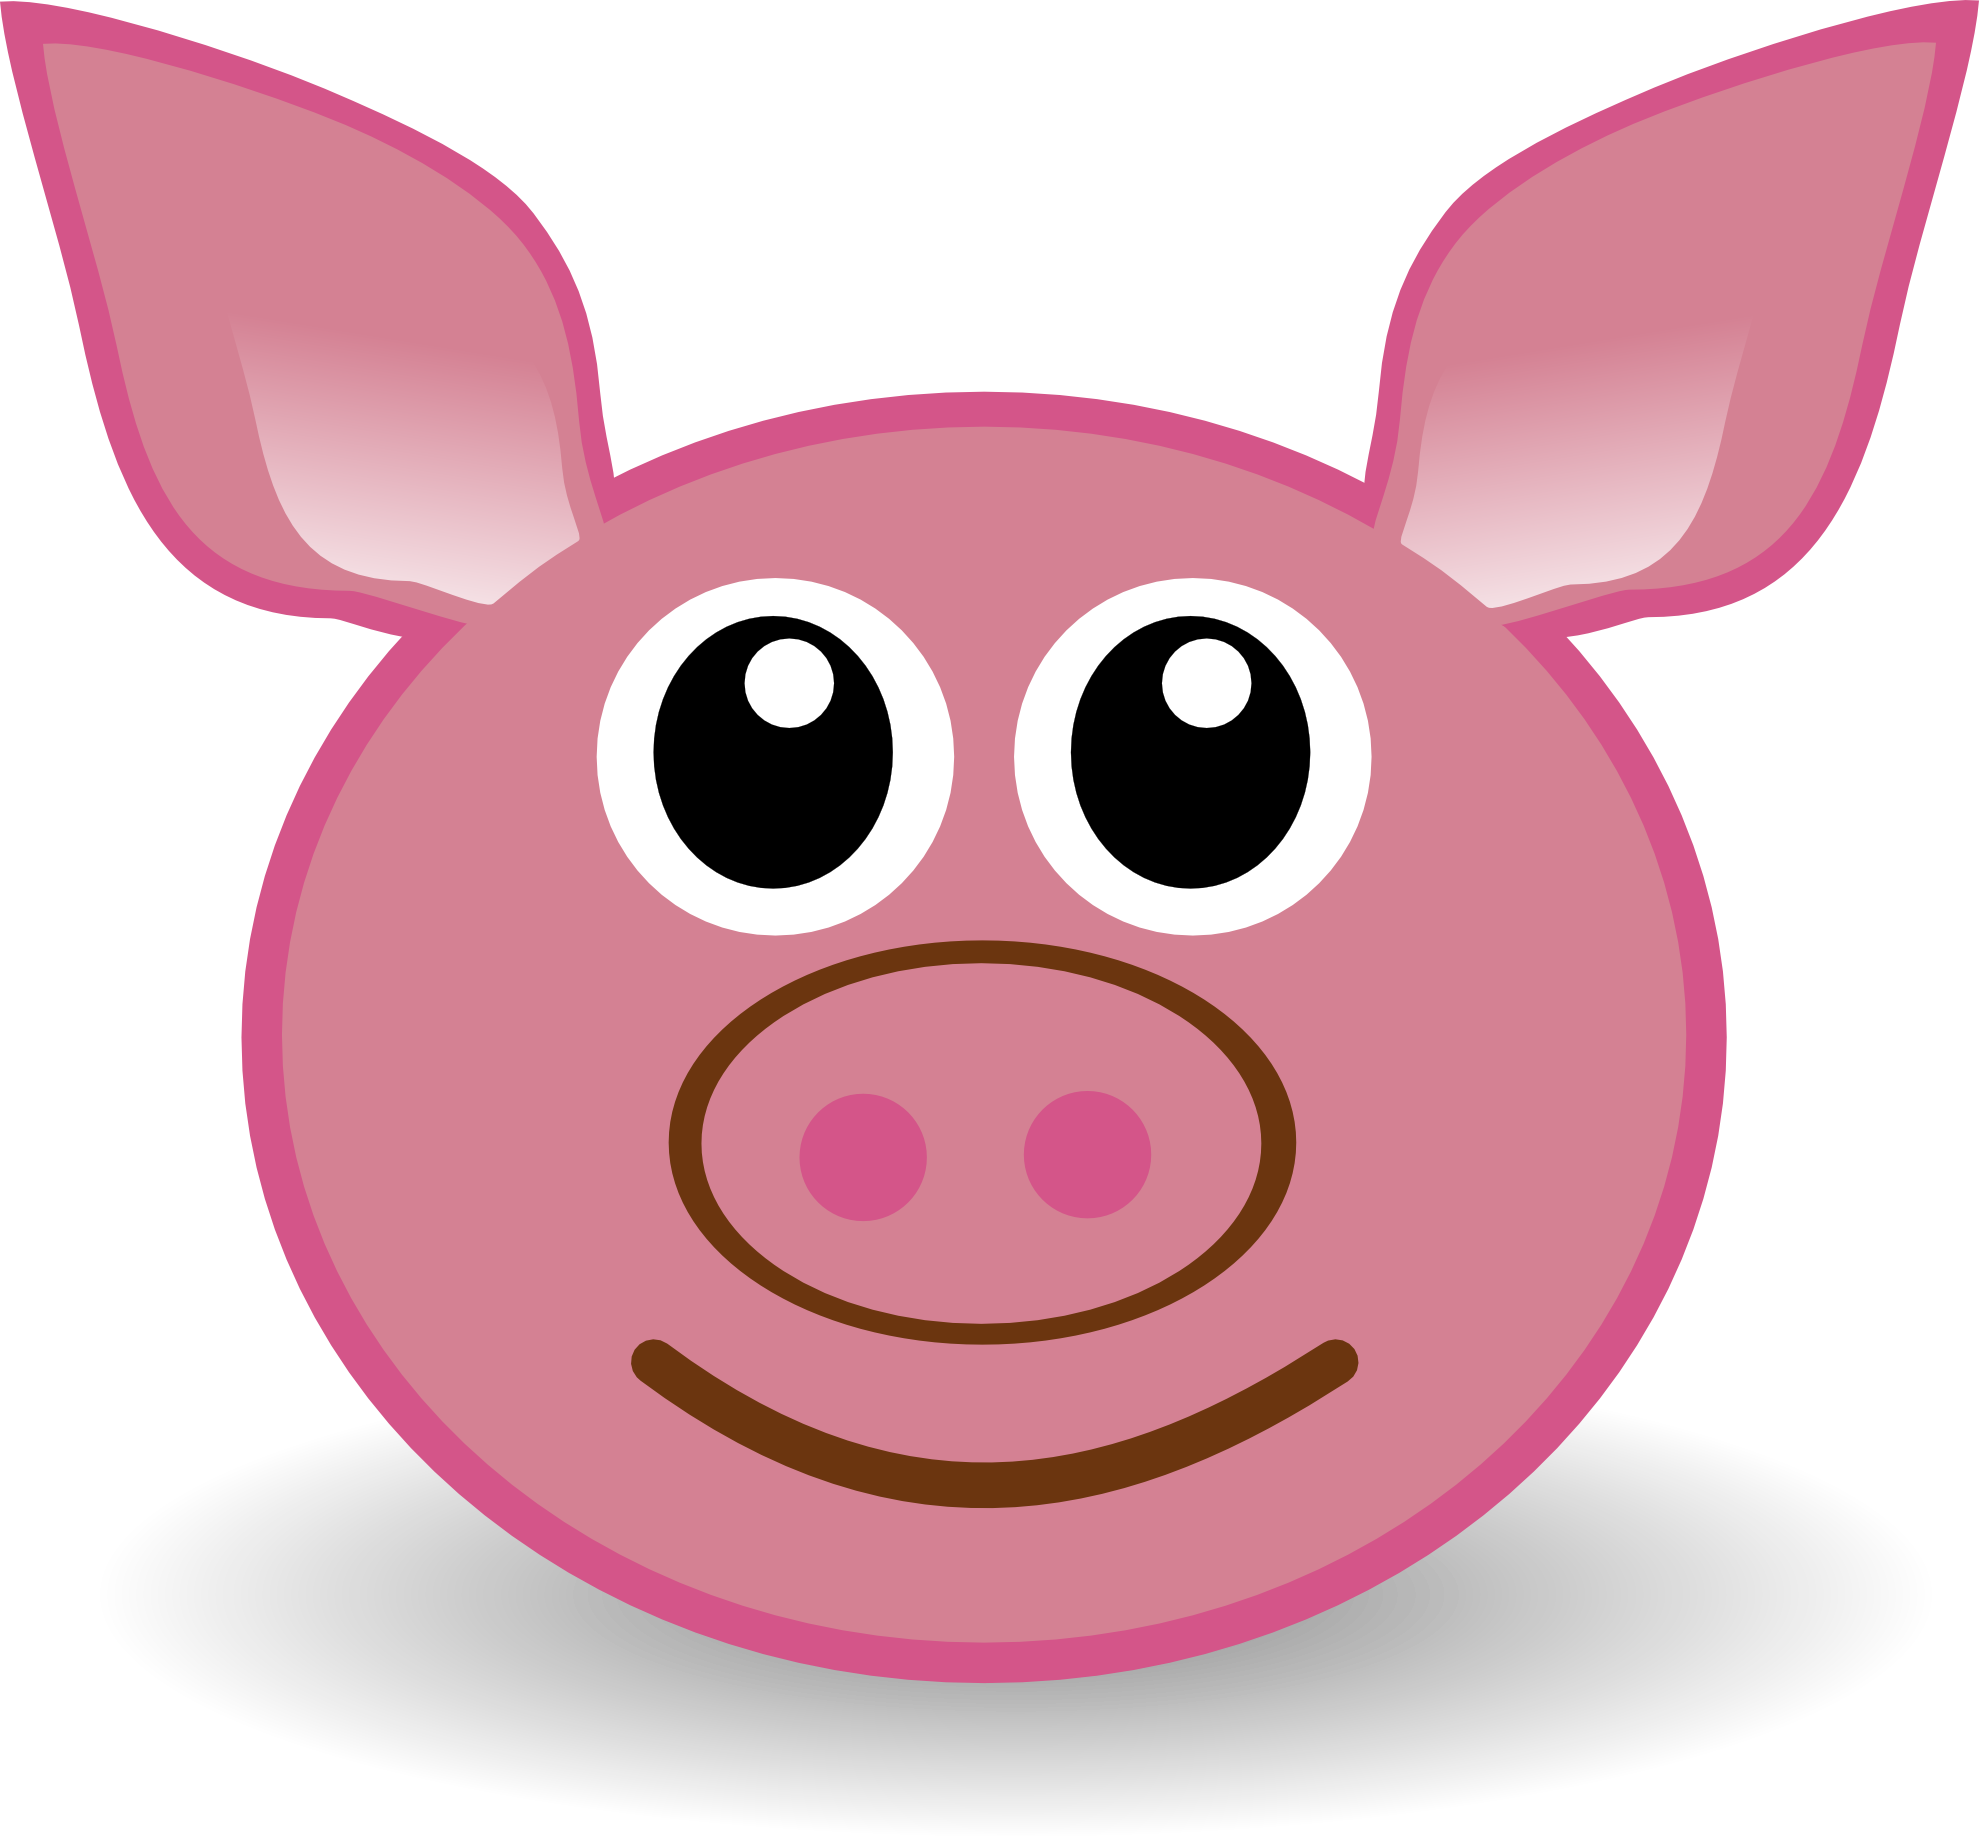 Pig face cartoon free download clip art on